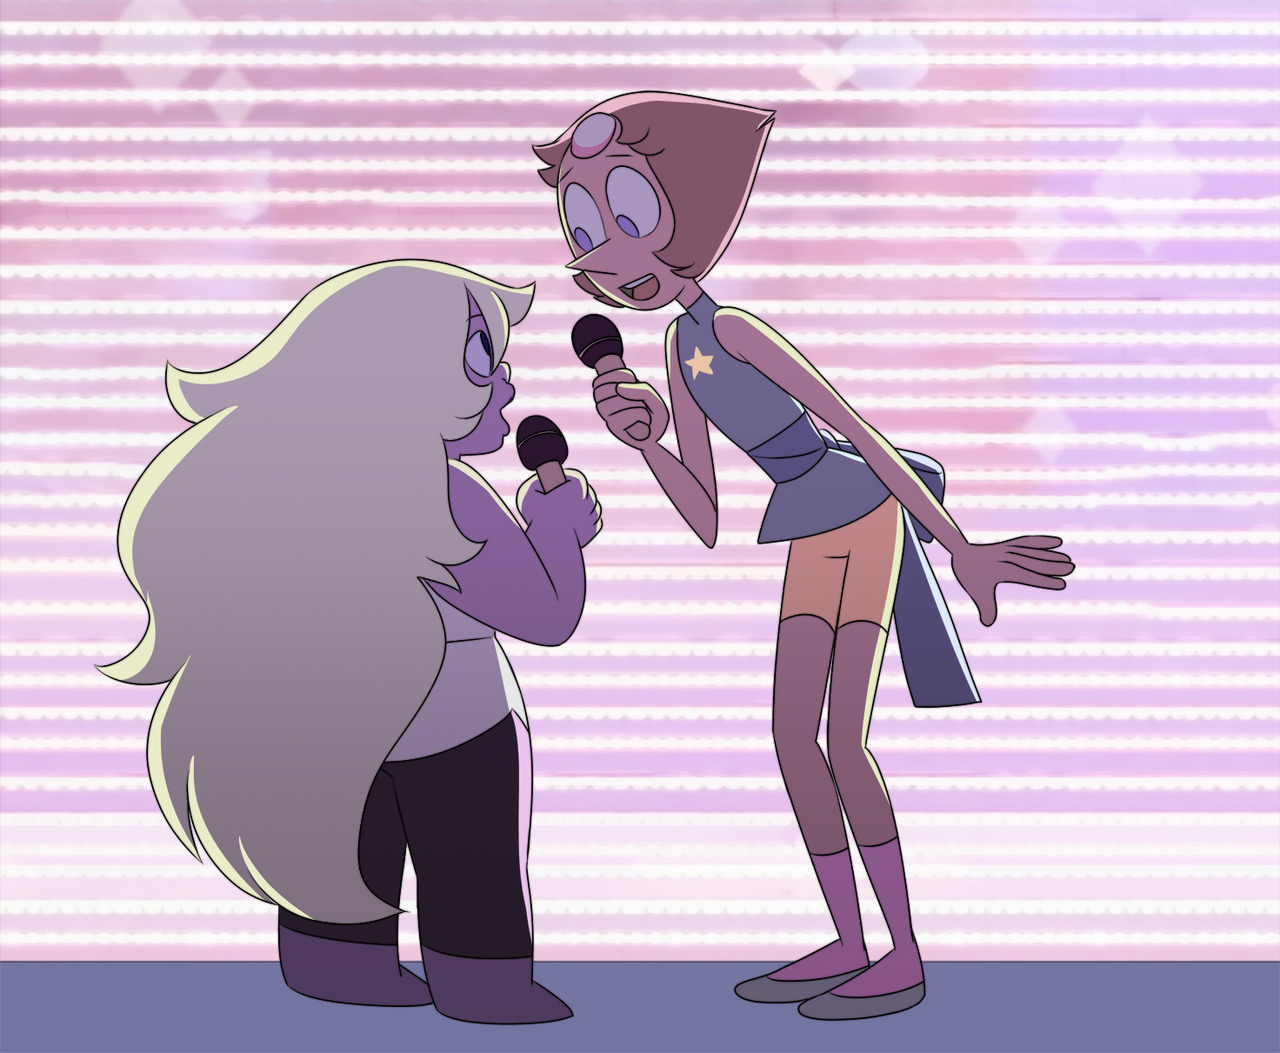 That’s you and me, it’s for the melody Let’s you and me get into harmony @annadesu @fuckyeahpearlmethyst